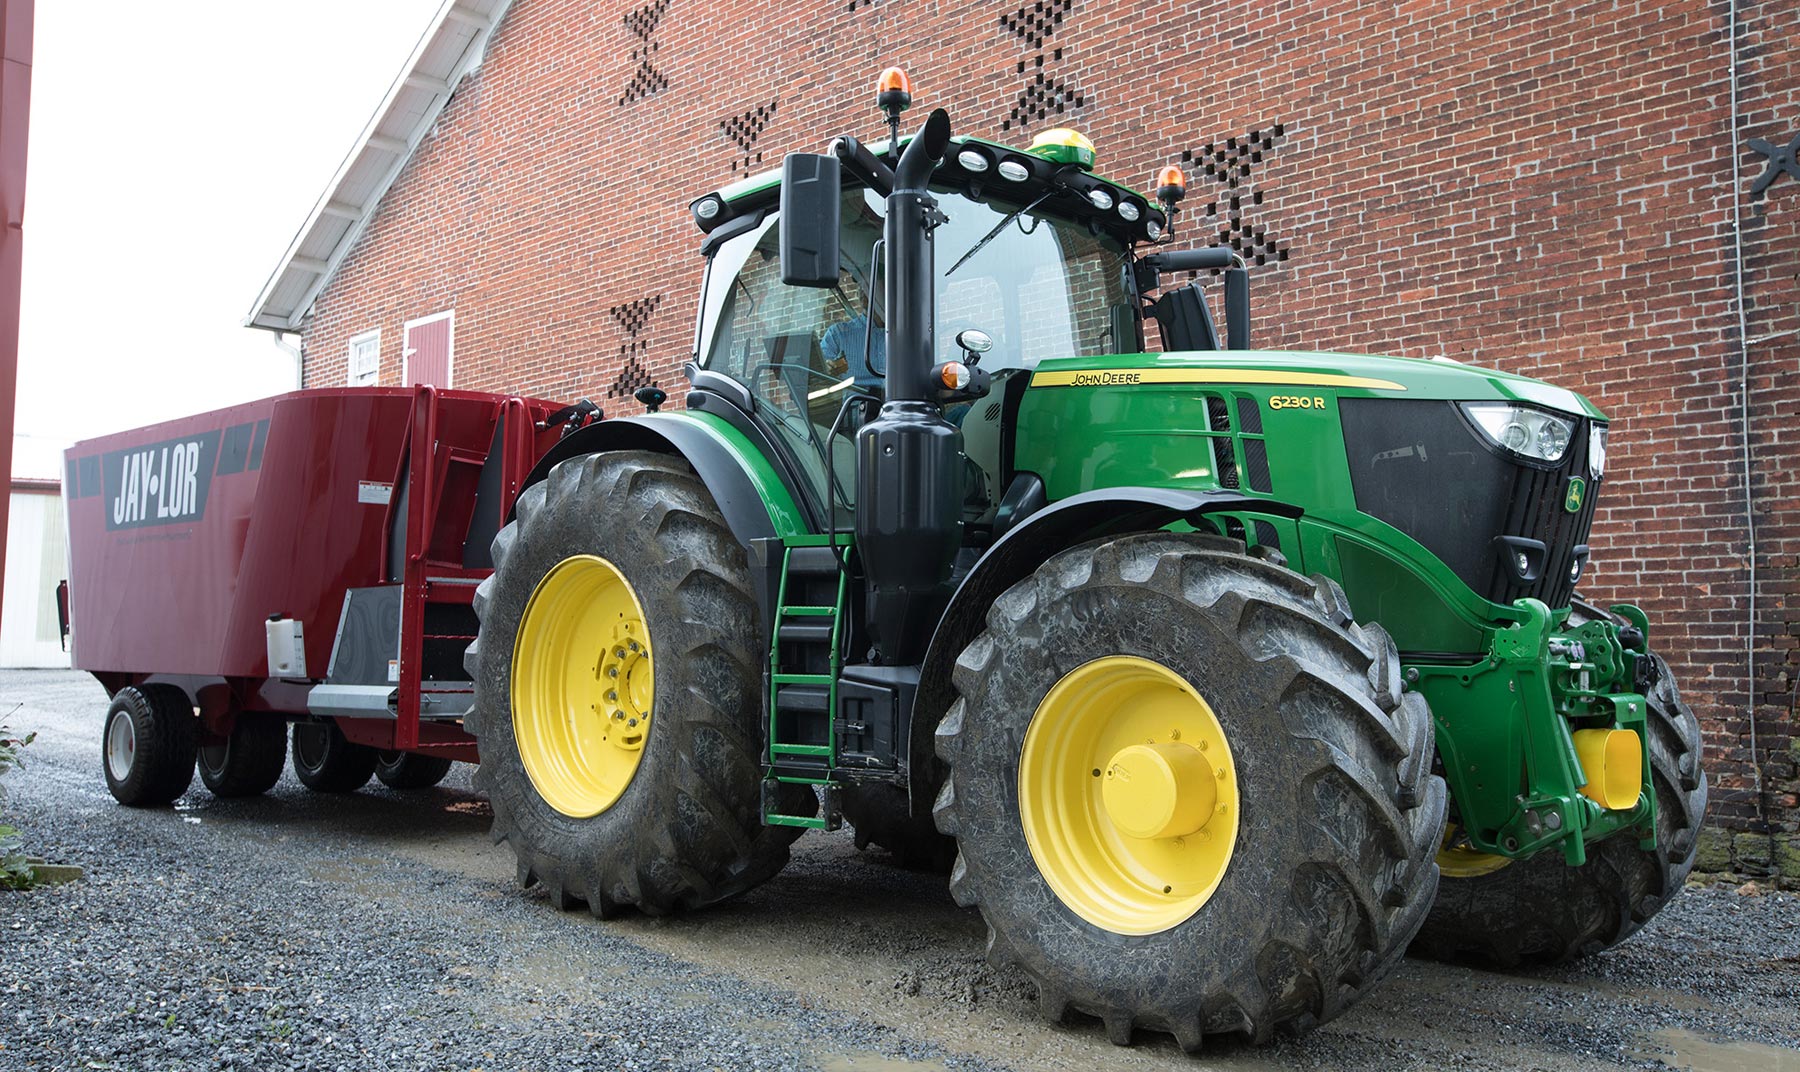 A 6230R tractor parked by a building